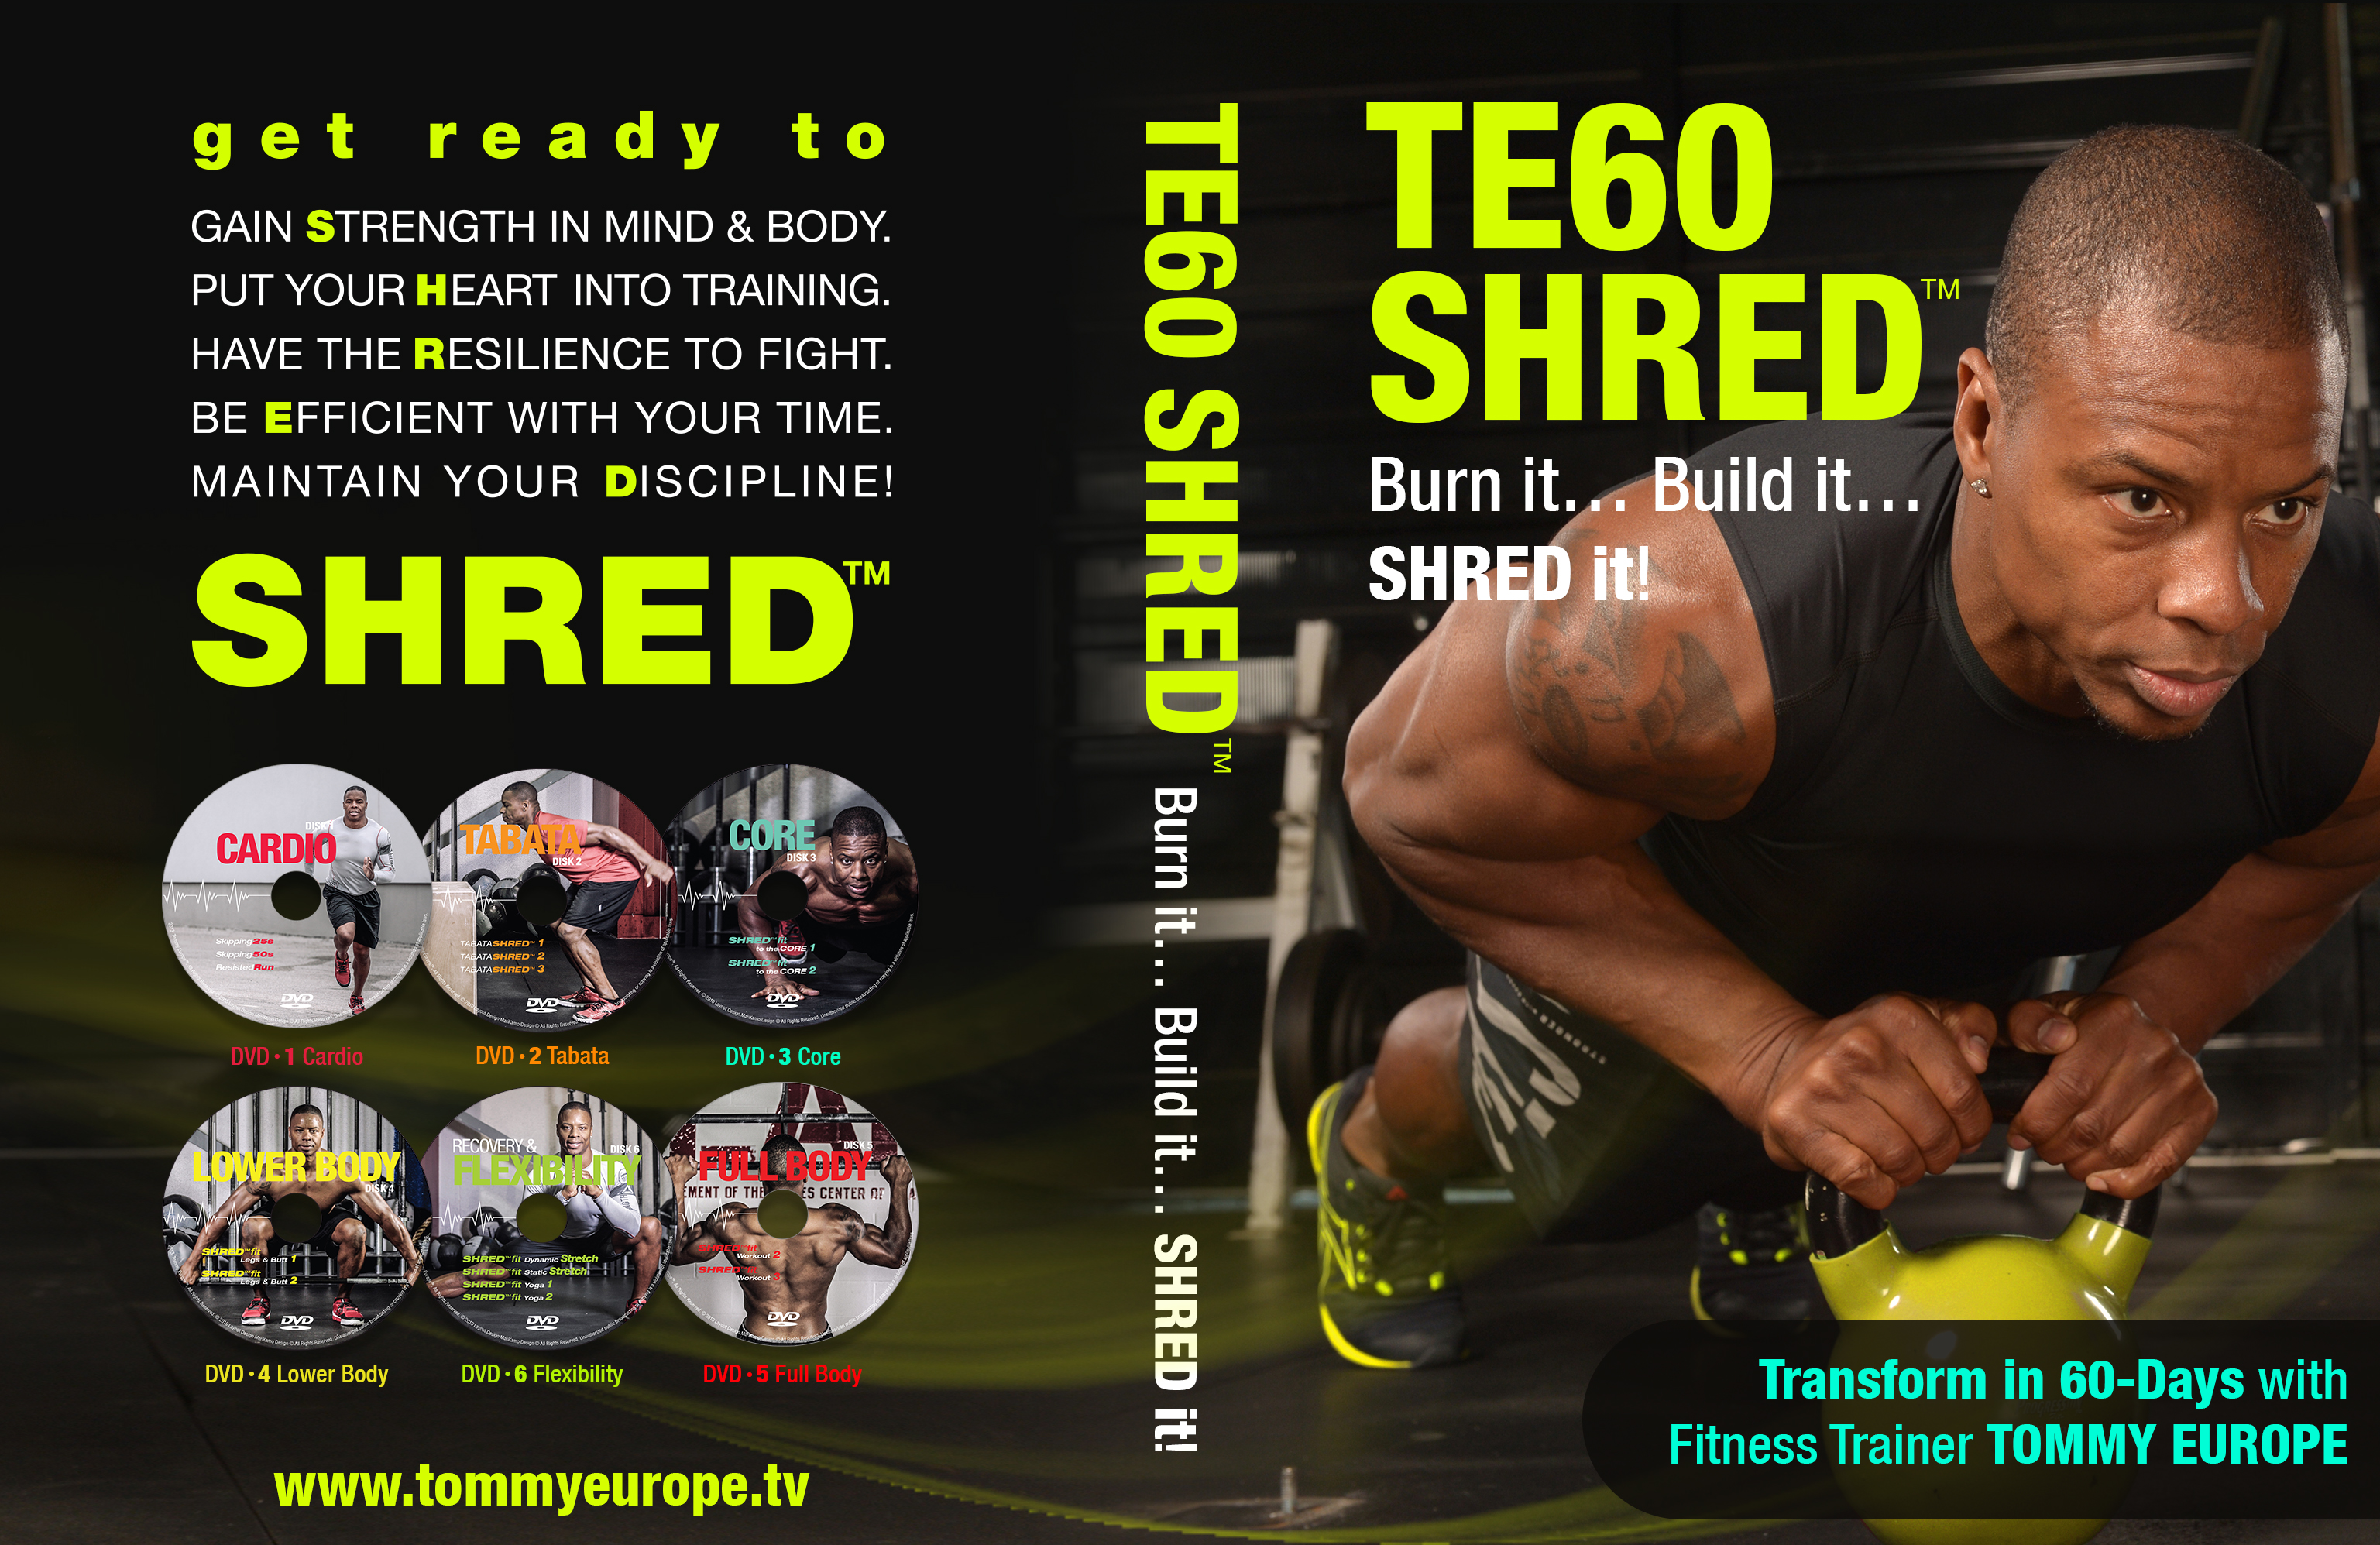 TE60 SHRED... The Ultimate, results driven 60-Day Workout program. www.te60shred.com